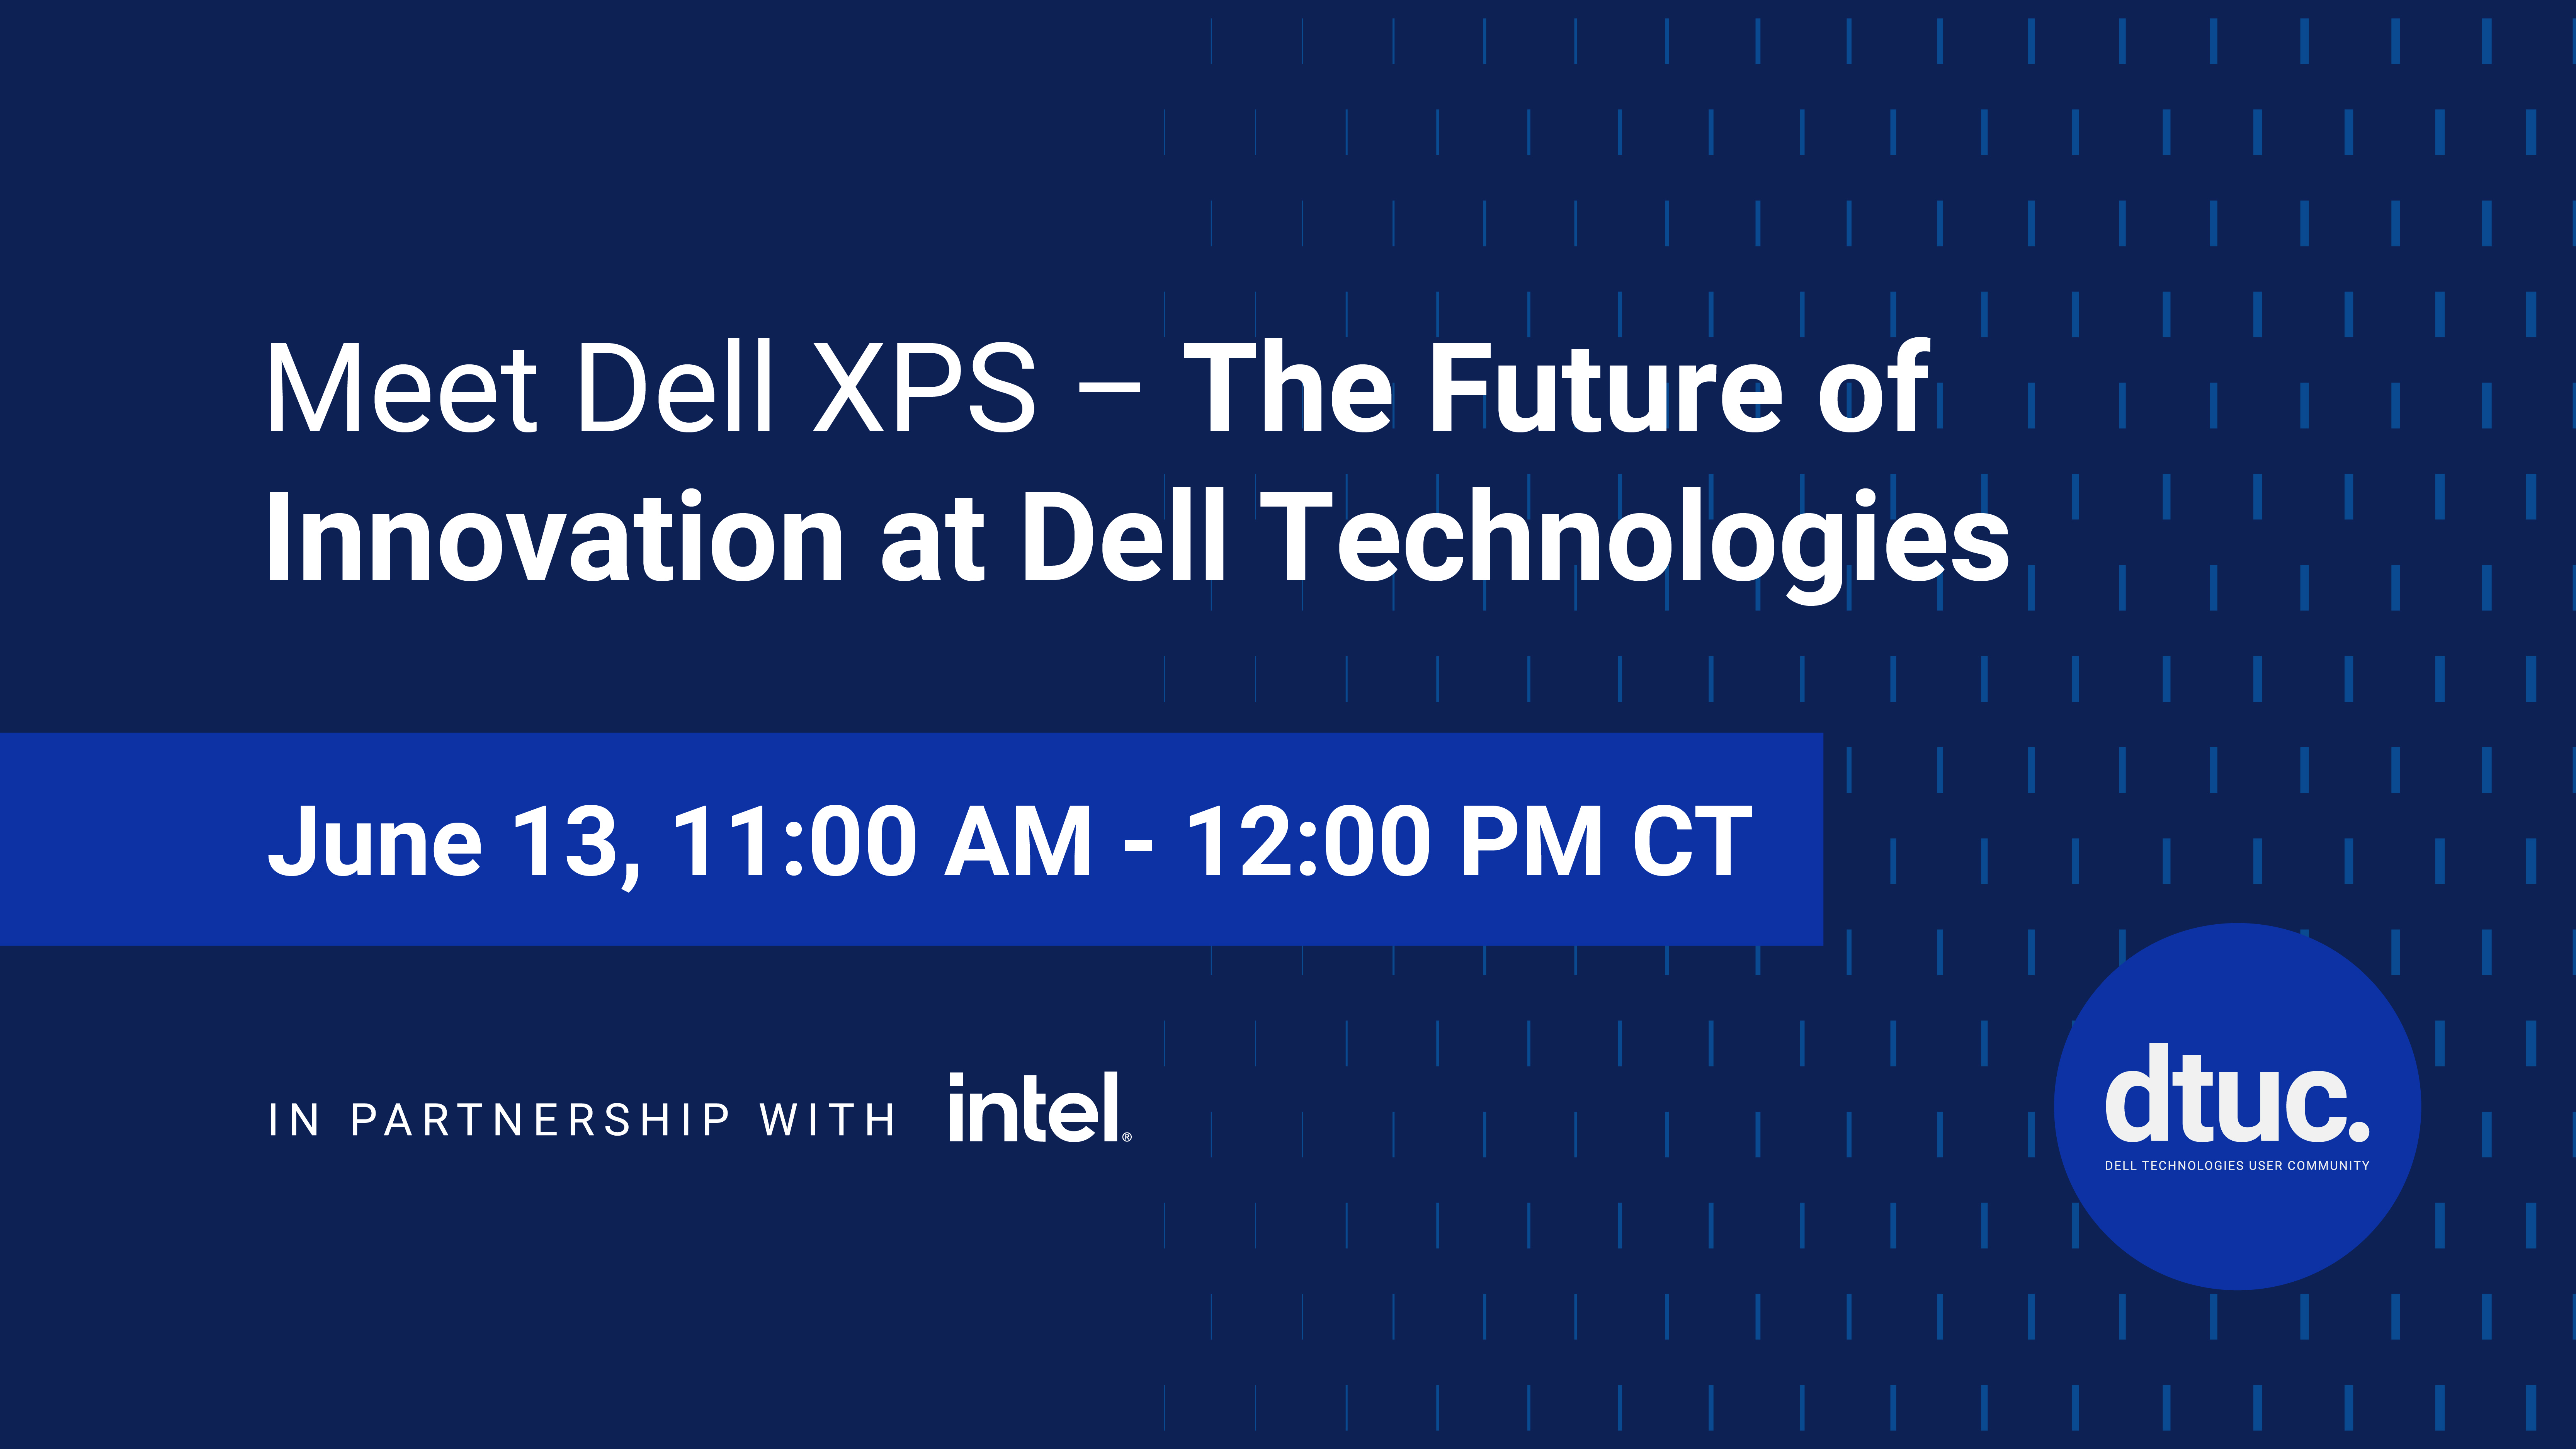 Meet Dell XPS - The Future of Innovation at Dell Technologies